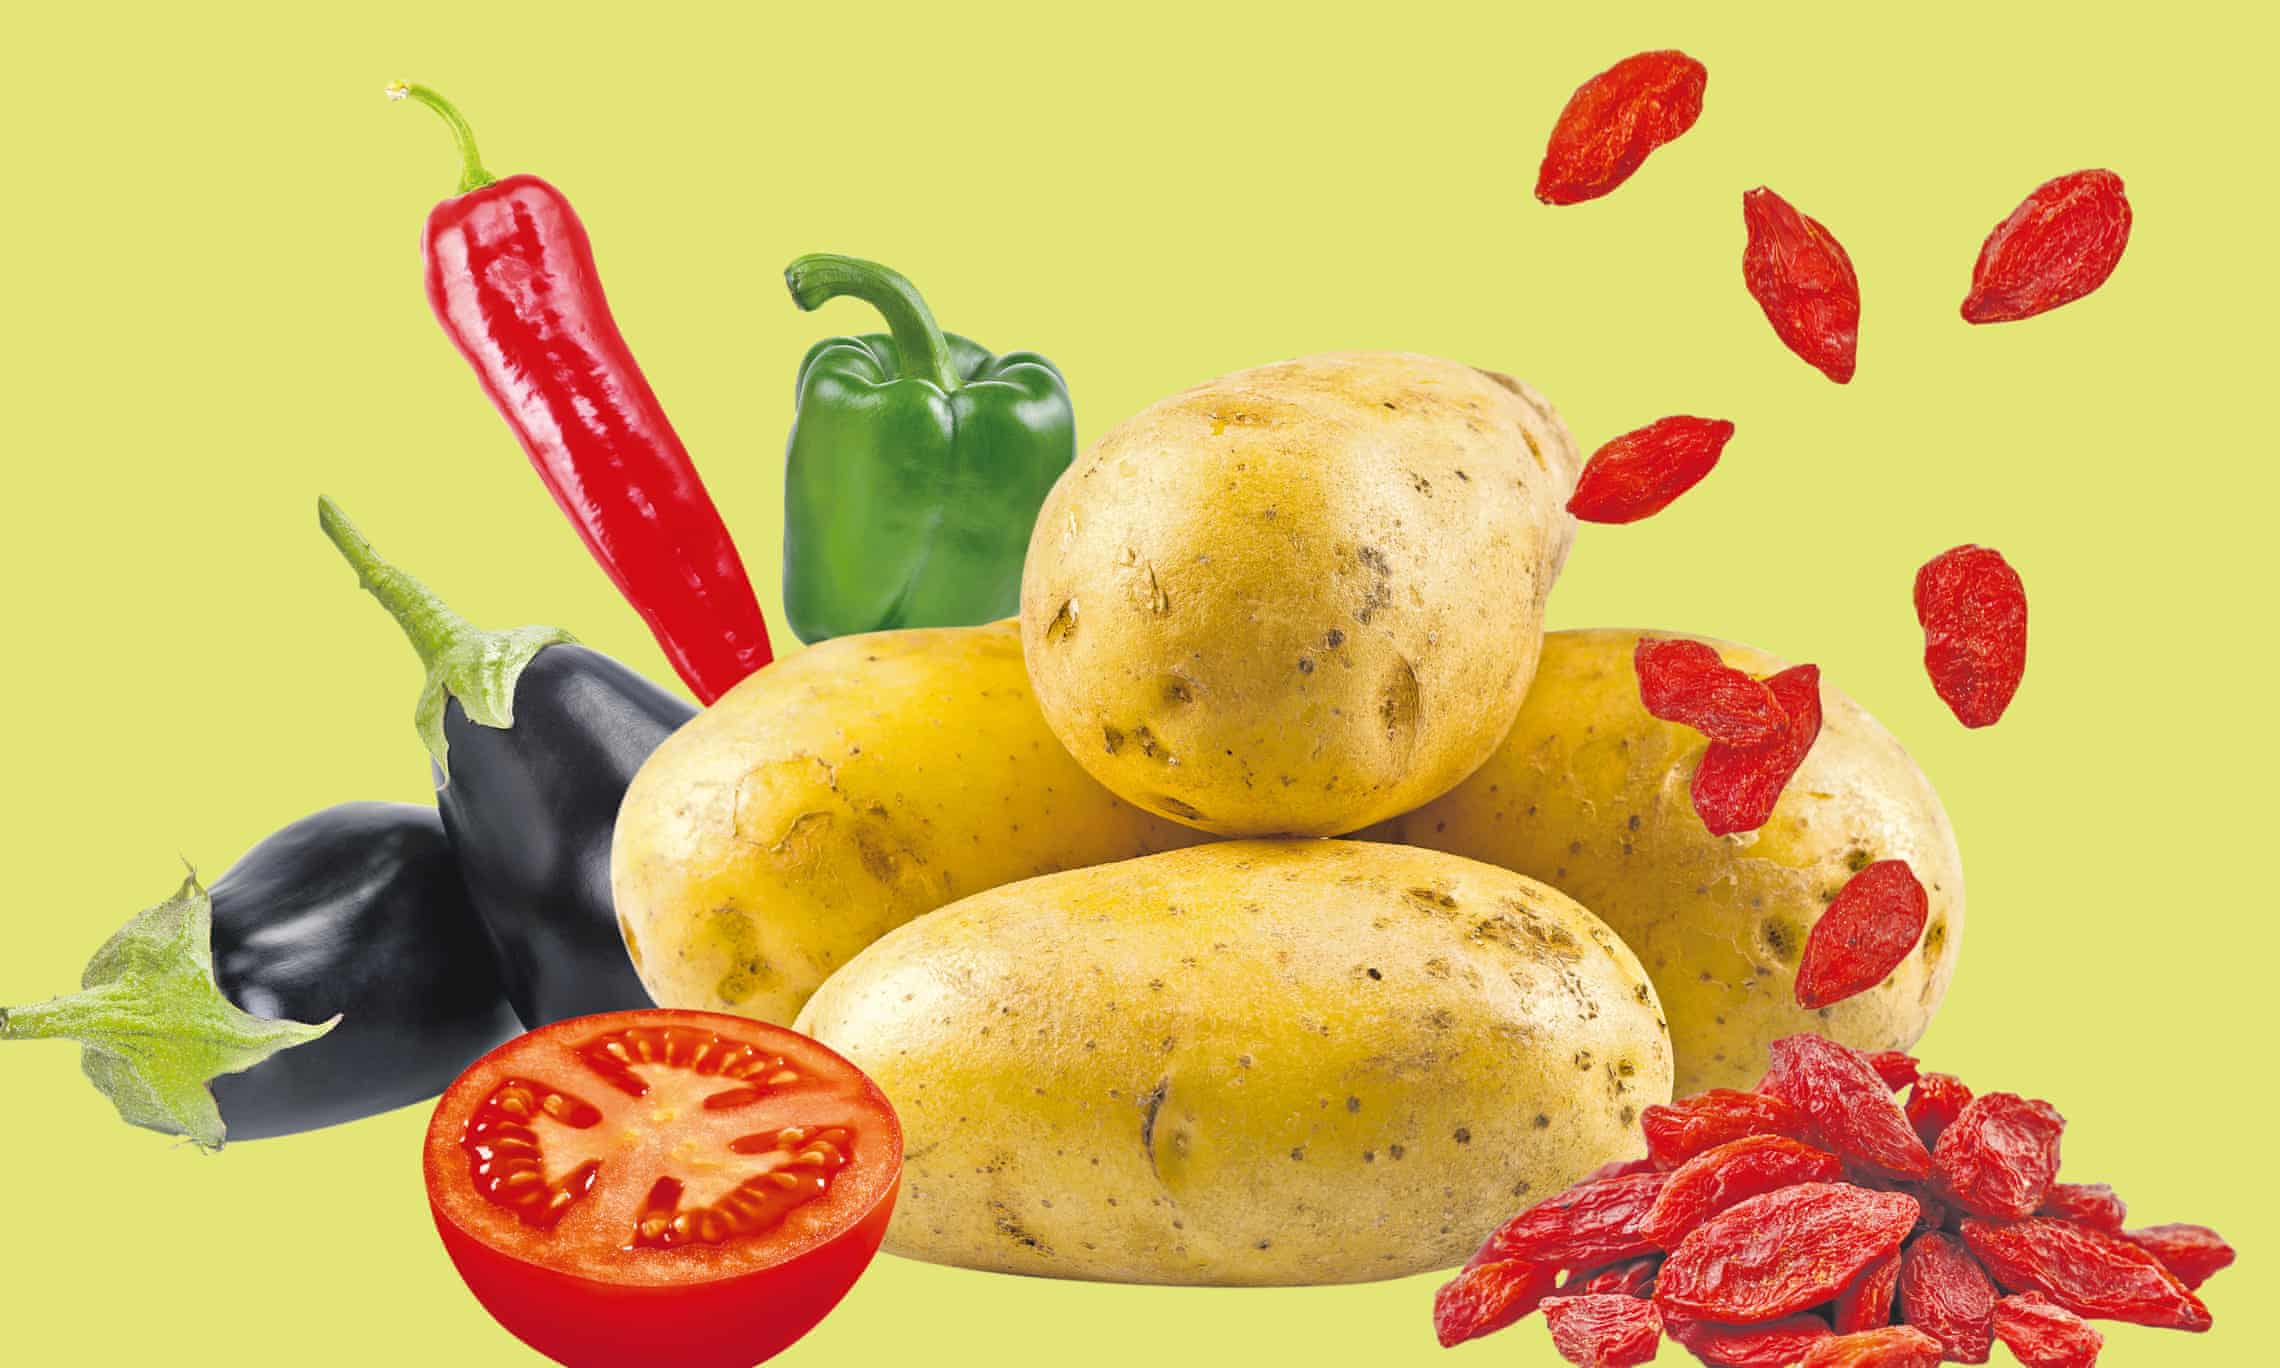 The Truth about Nightshades: Four Online Myths about Potatoes, Tomatoes and Aubergines